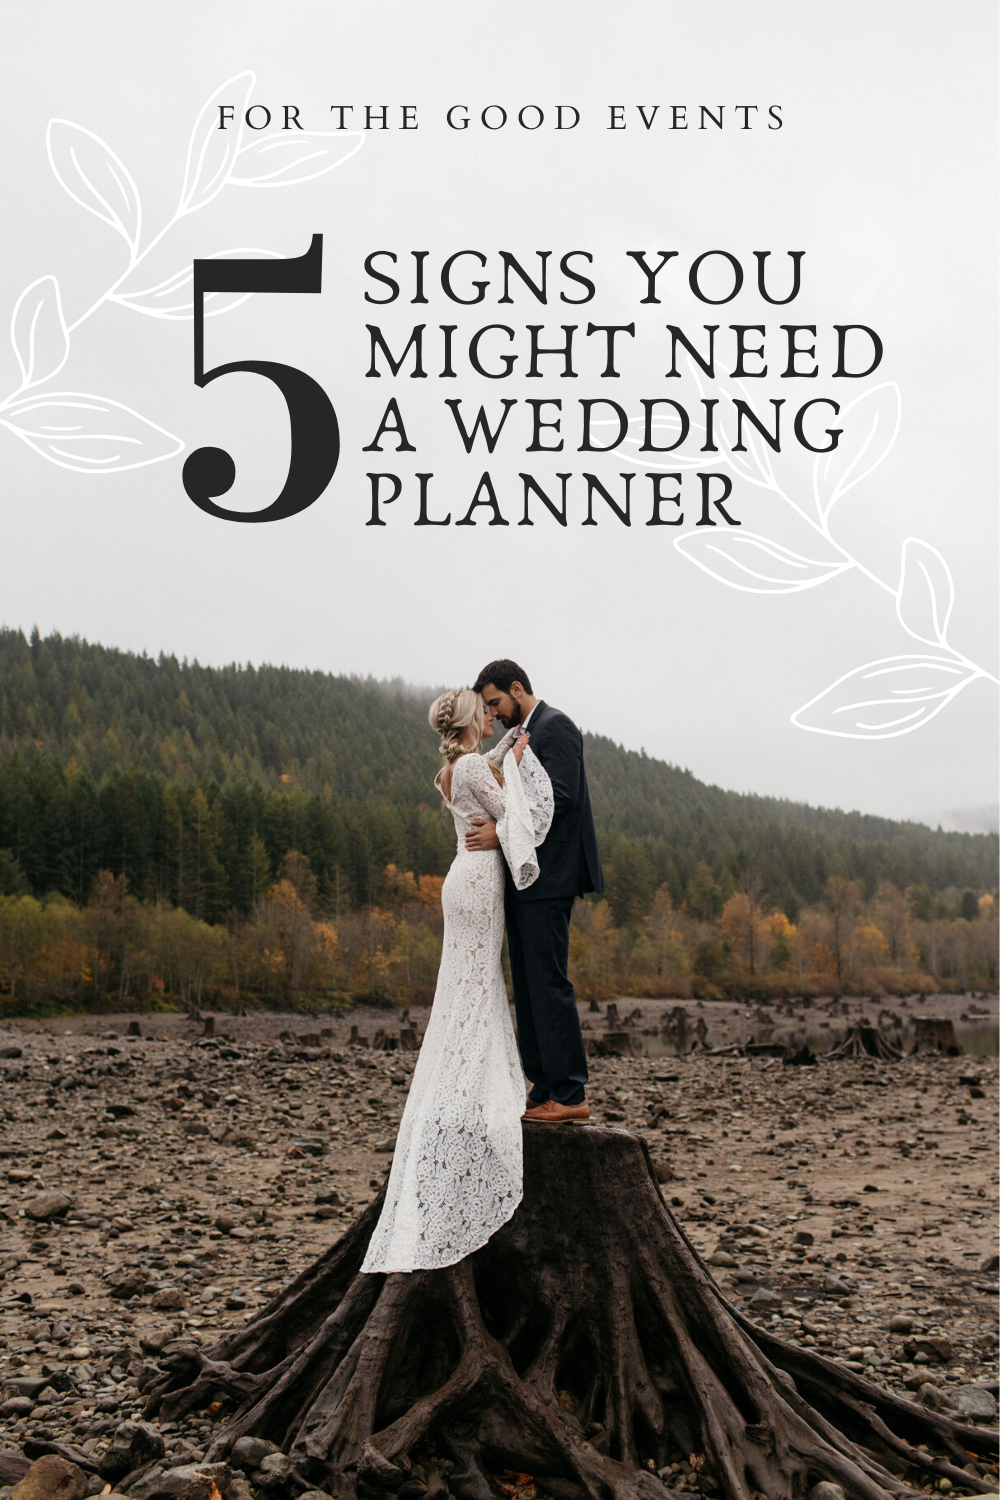 How to Know If You Need a Wedding Planner